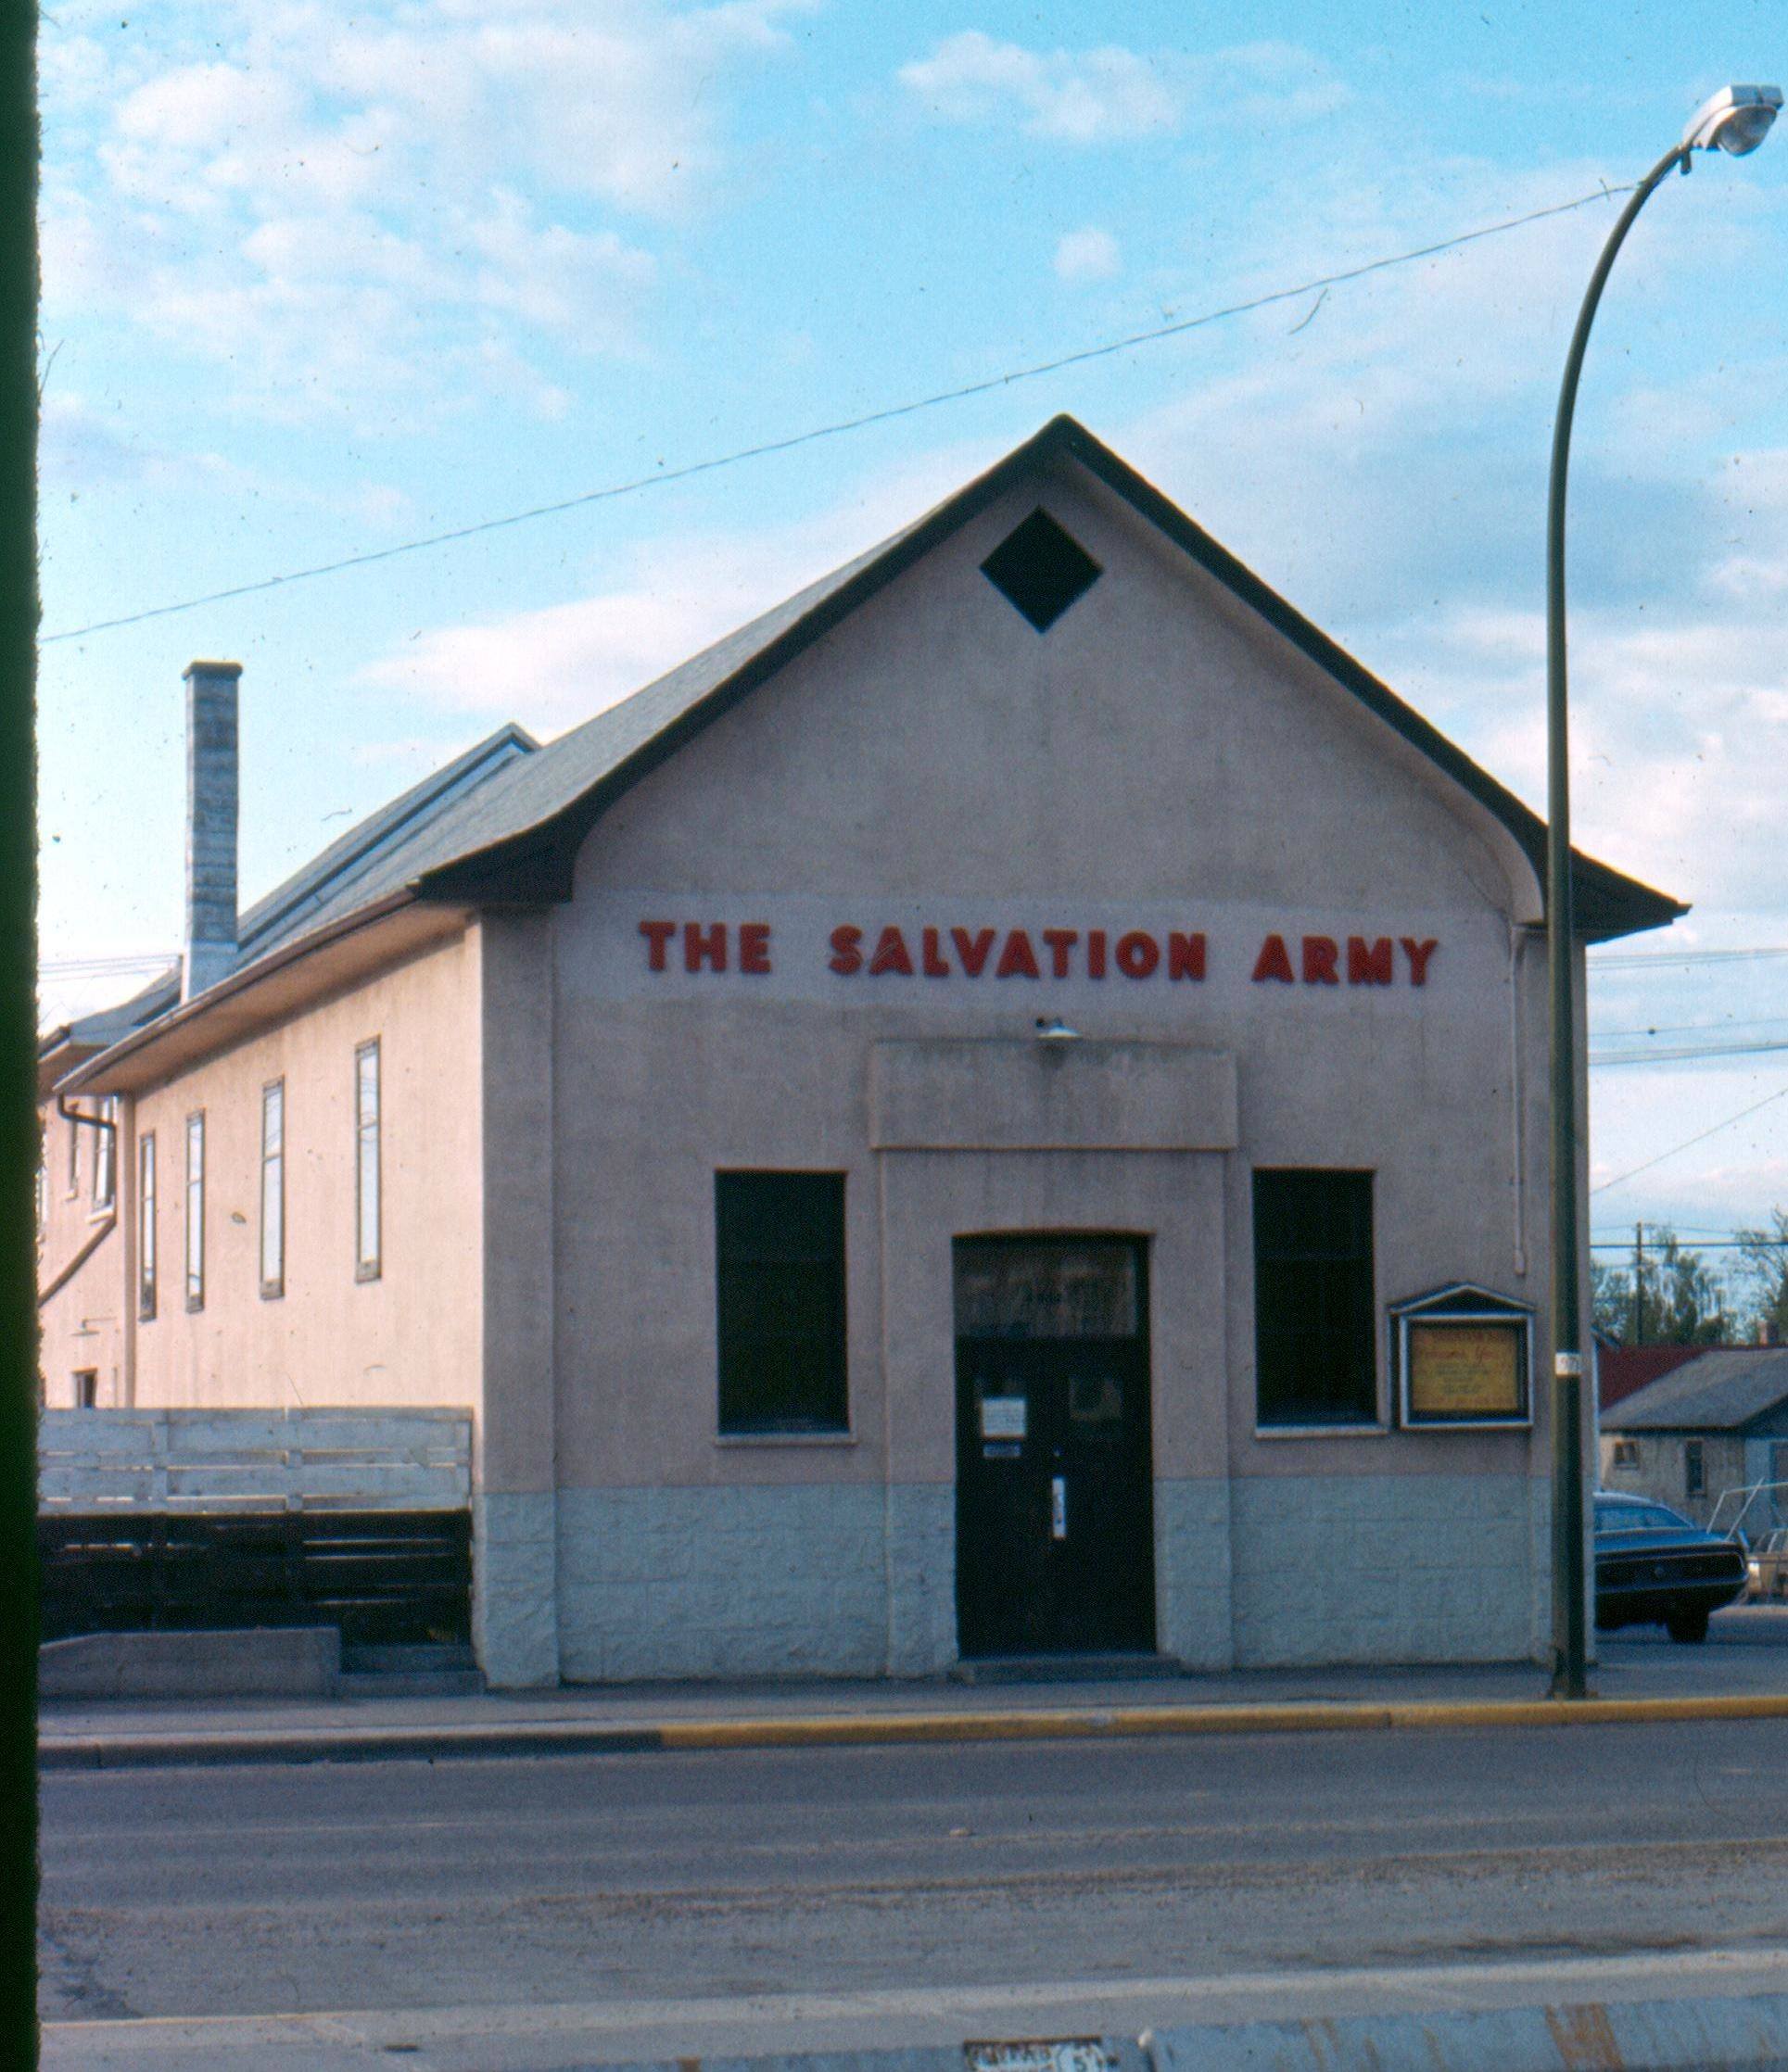 MILESTONE - The Salvation Army Citadel on 51 St. and 49 Ave.